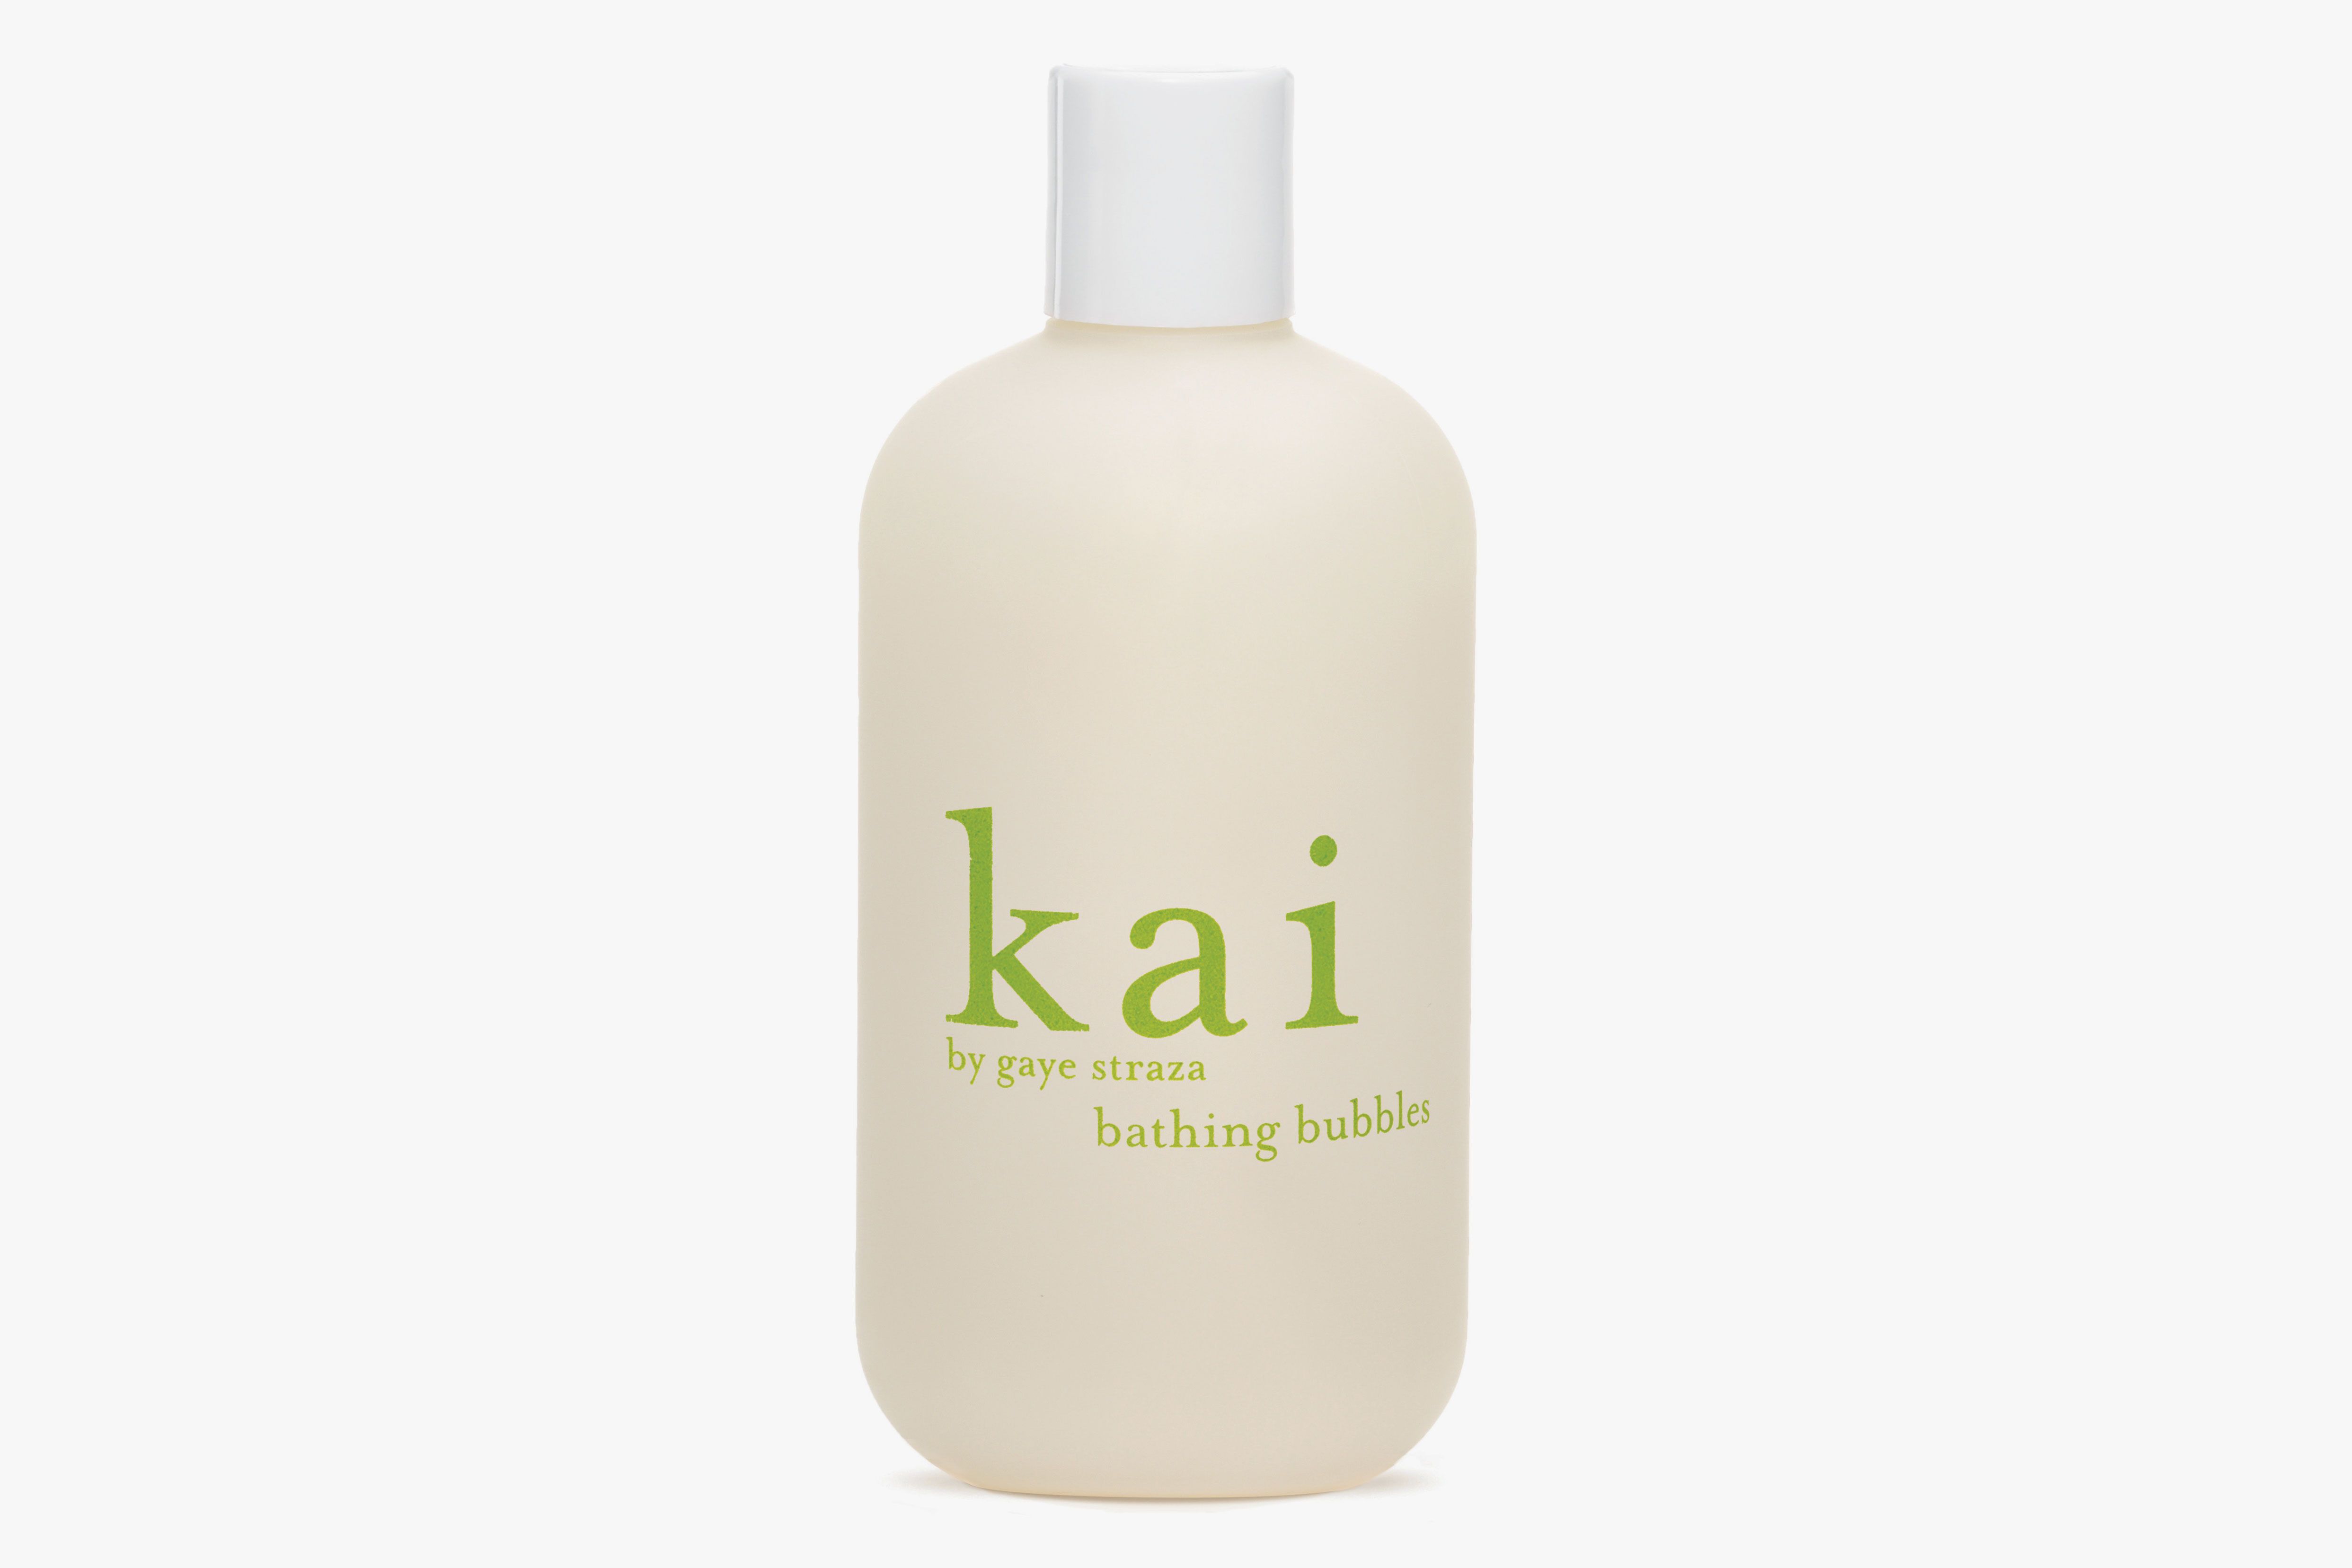 Best Bath Product in 2019 